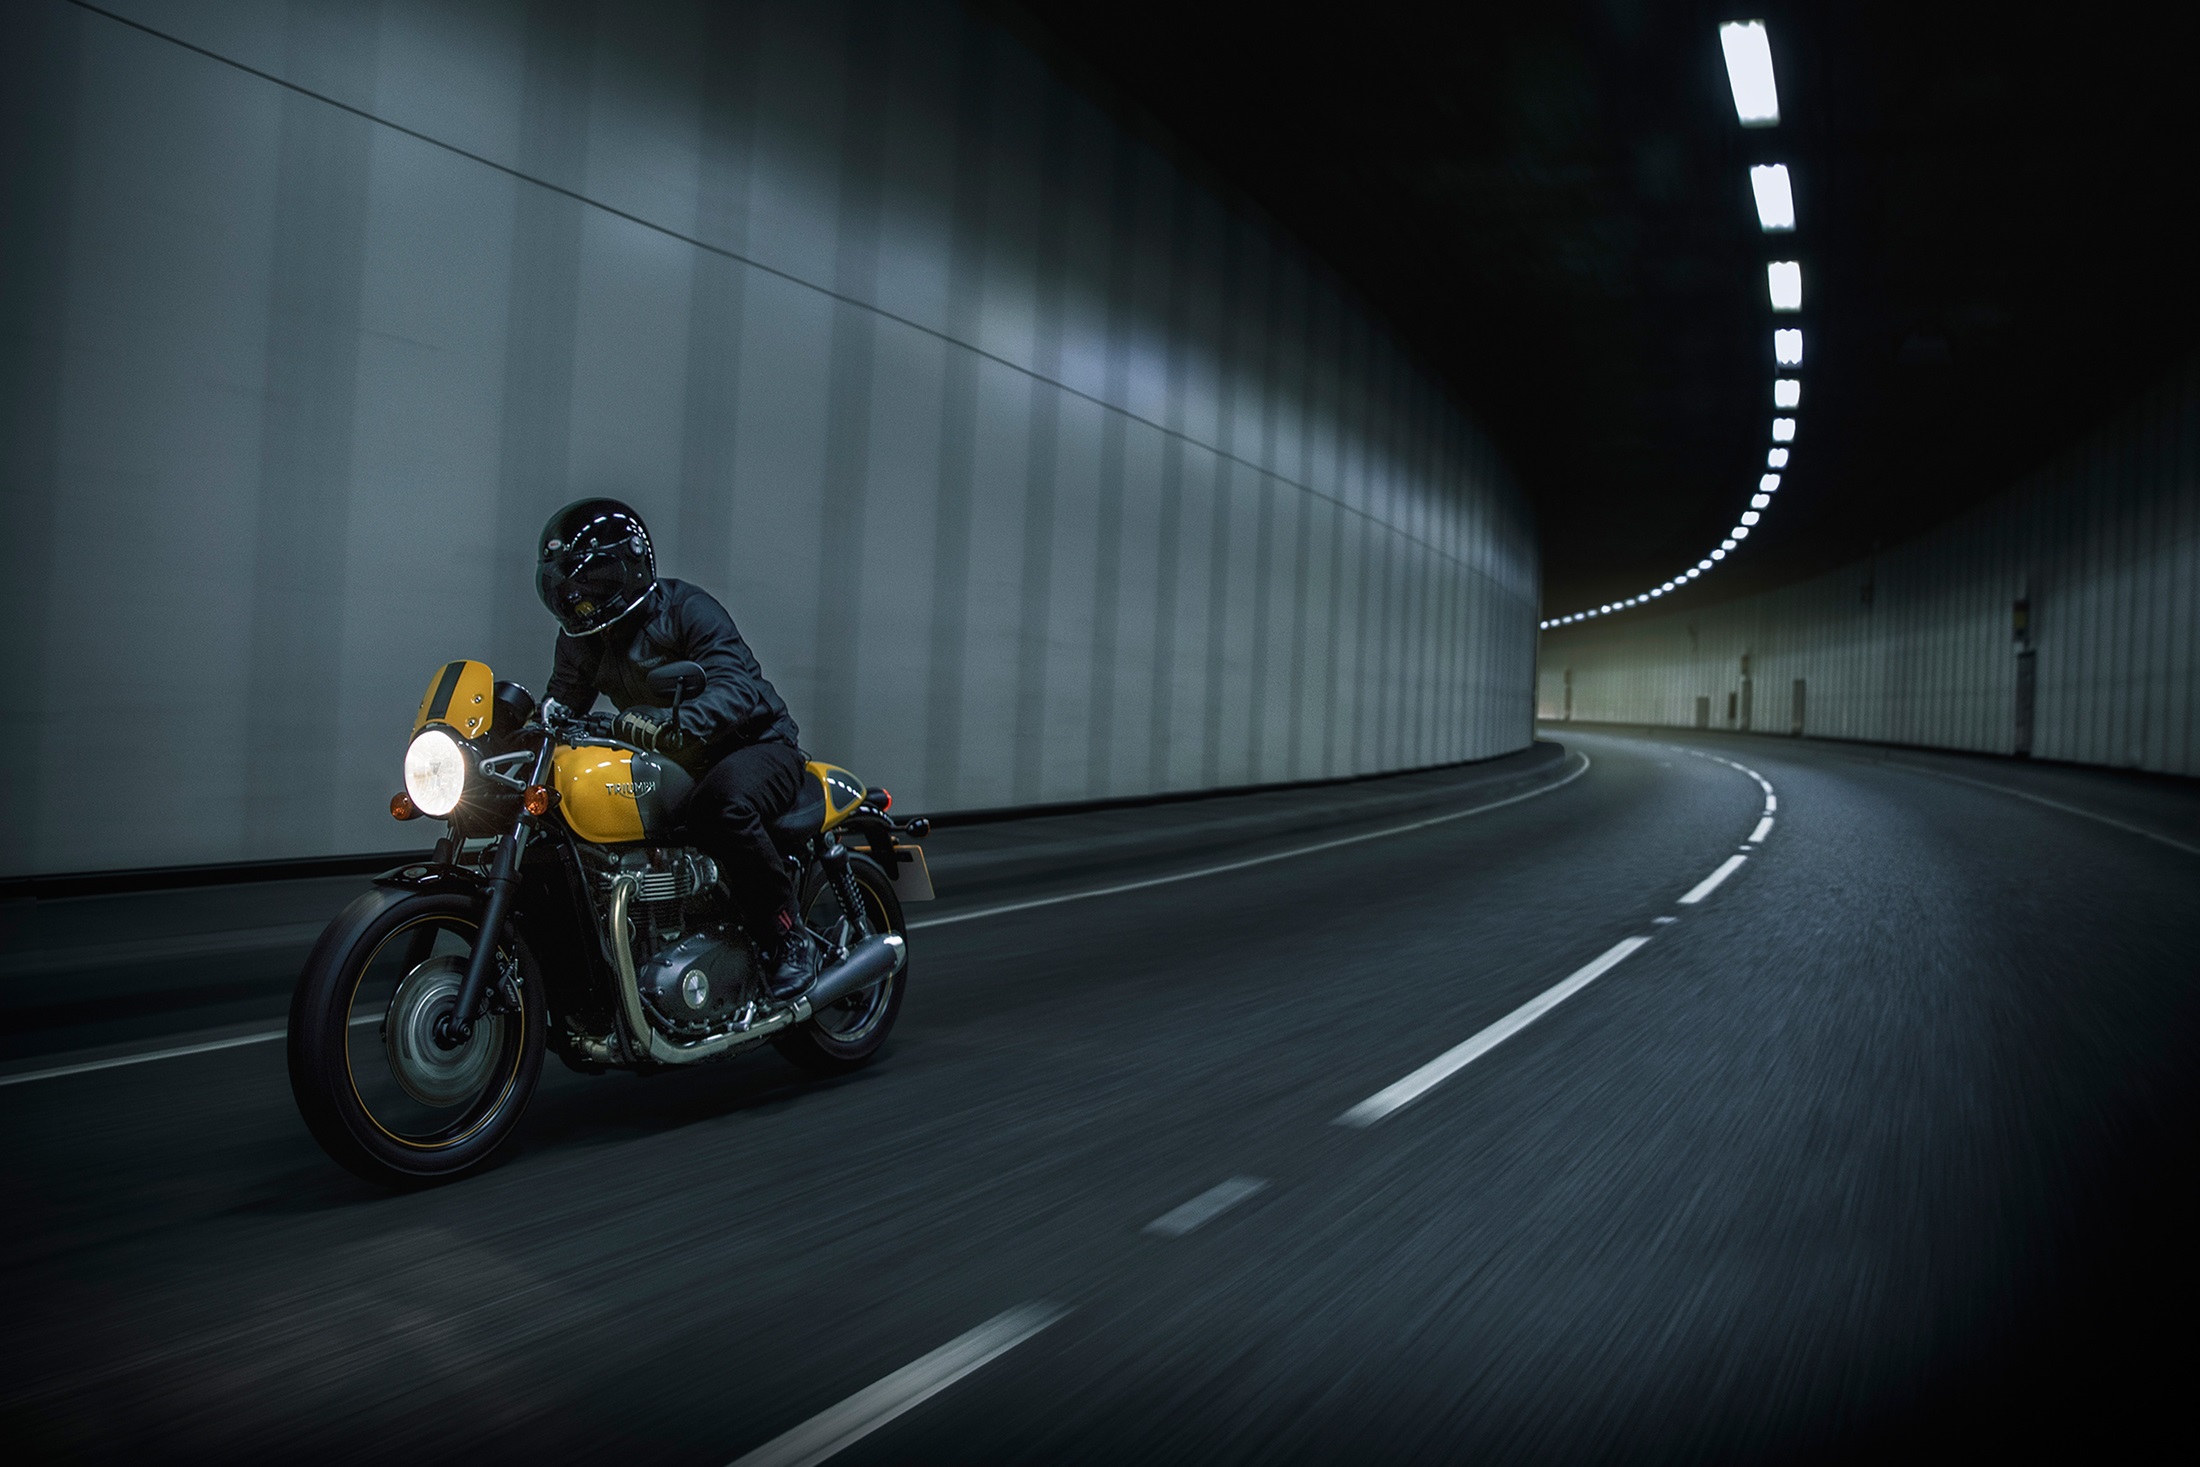 Nice Images Collection: Triumph Street Cup Desktop Wallpapers